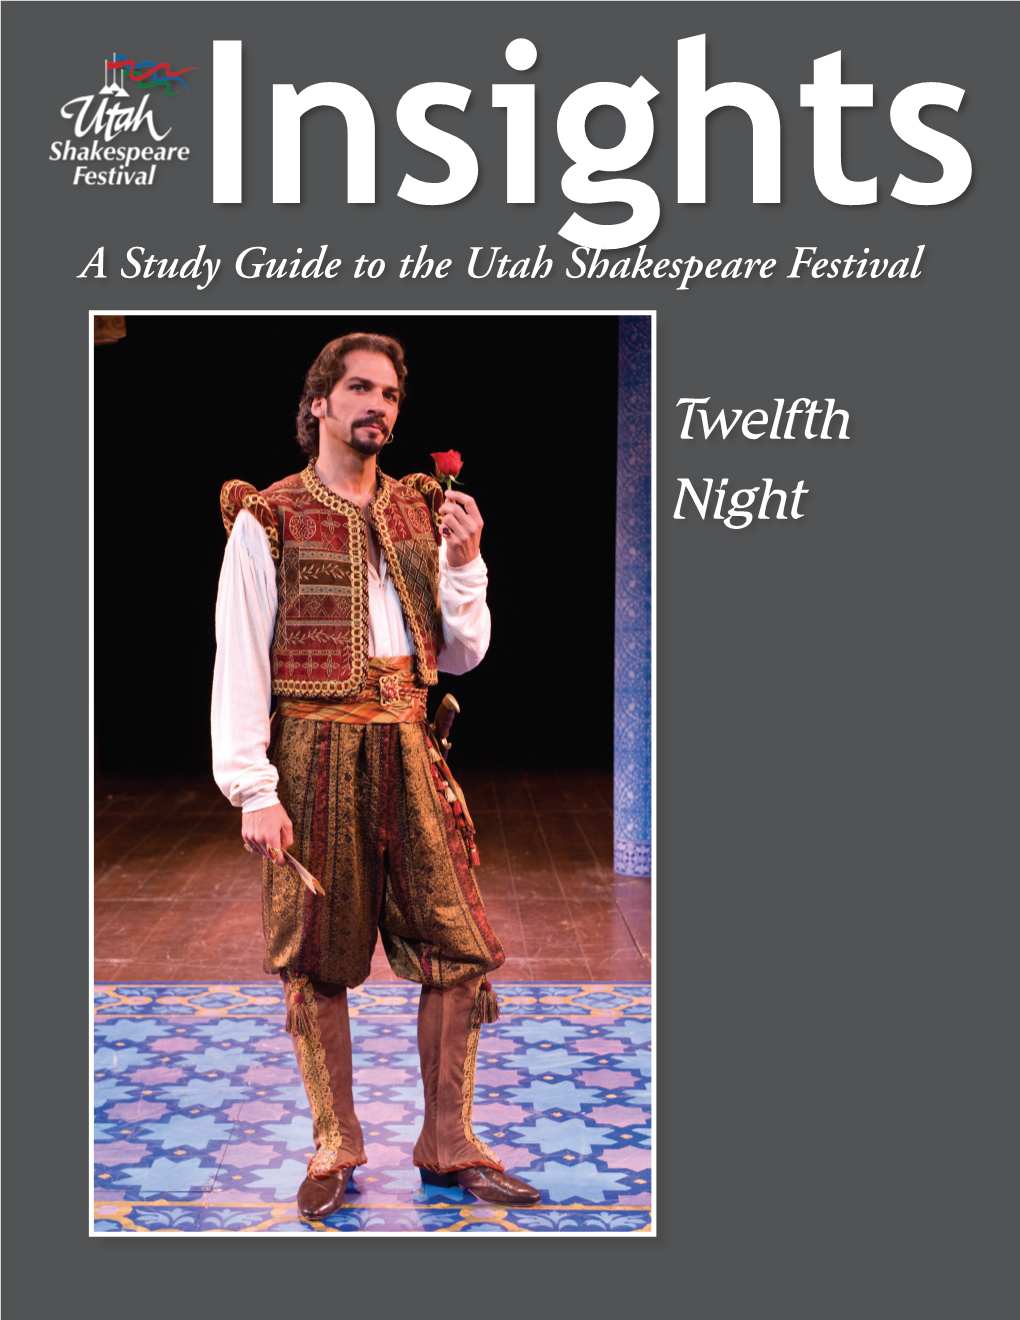 Twelfth Night the Articles in This Study Guide Are Not Meant to Mirror Or Interpret Any Productions at the Utah Shakespeare Festival